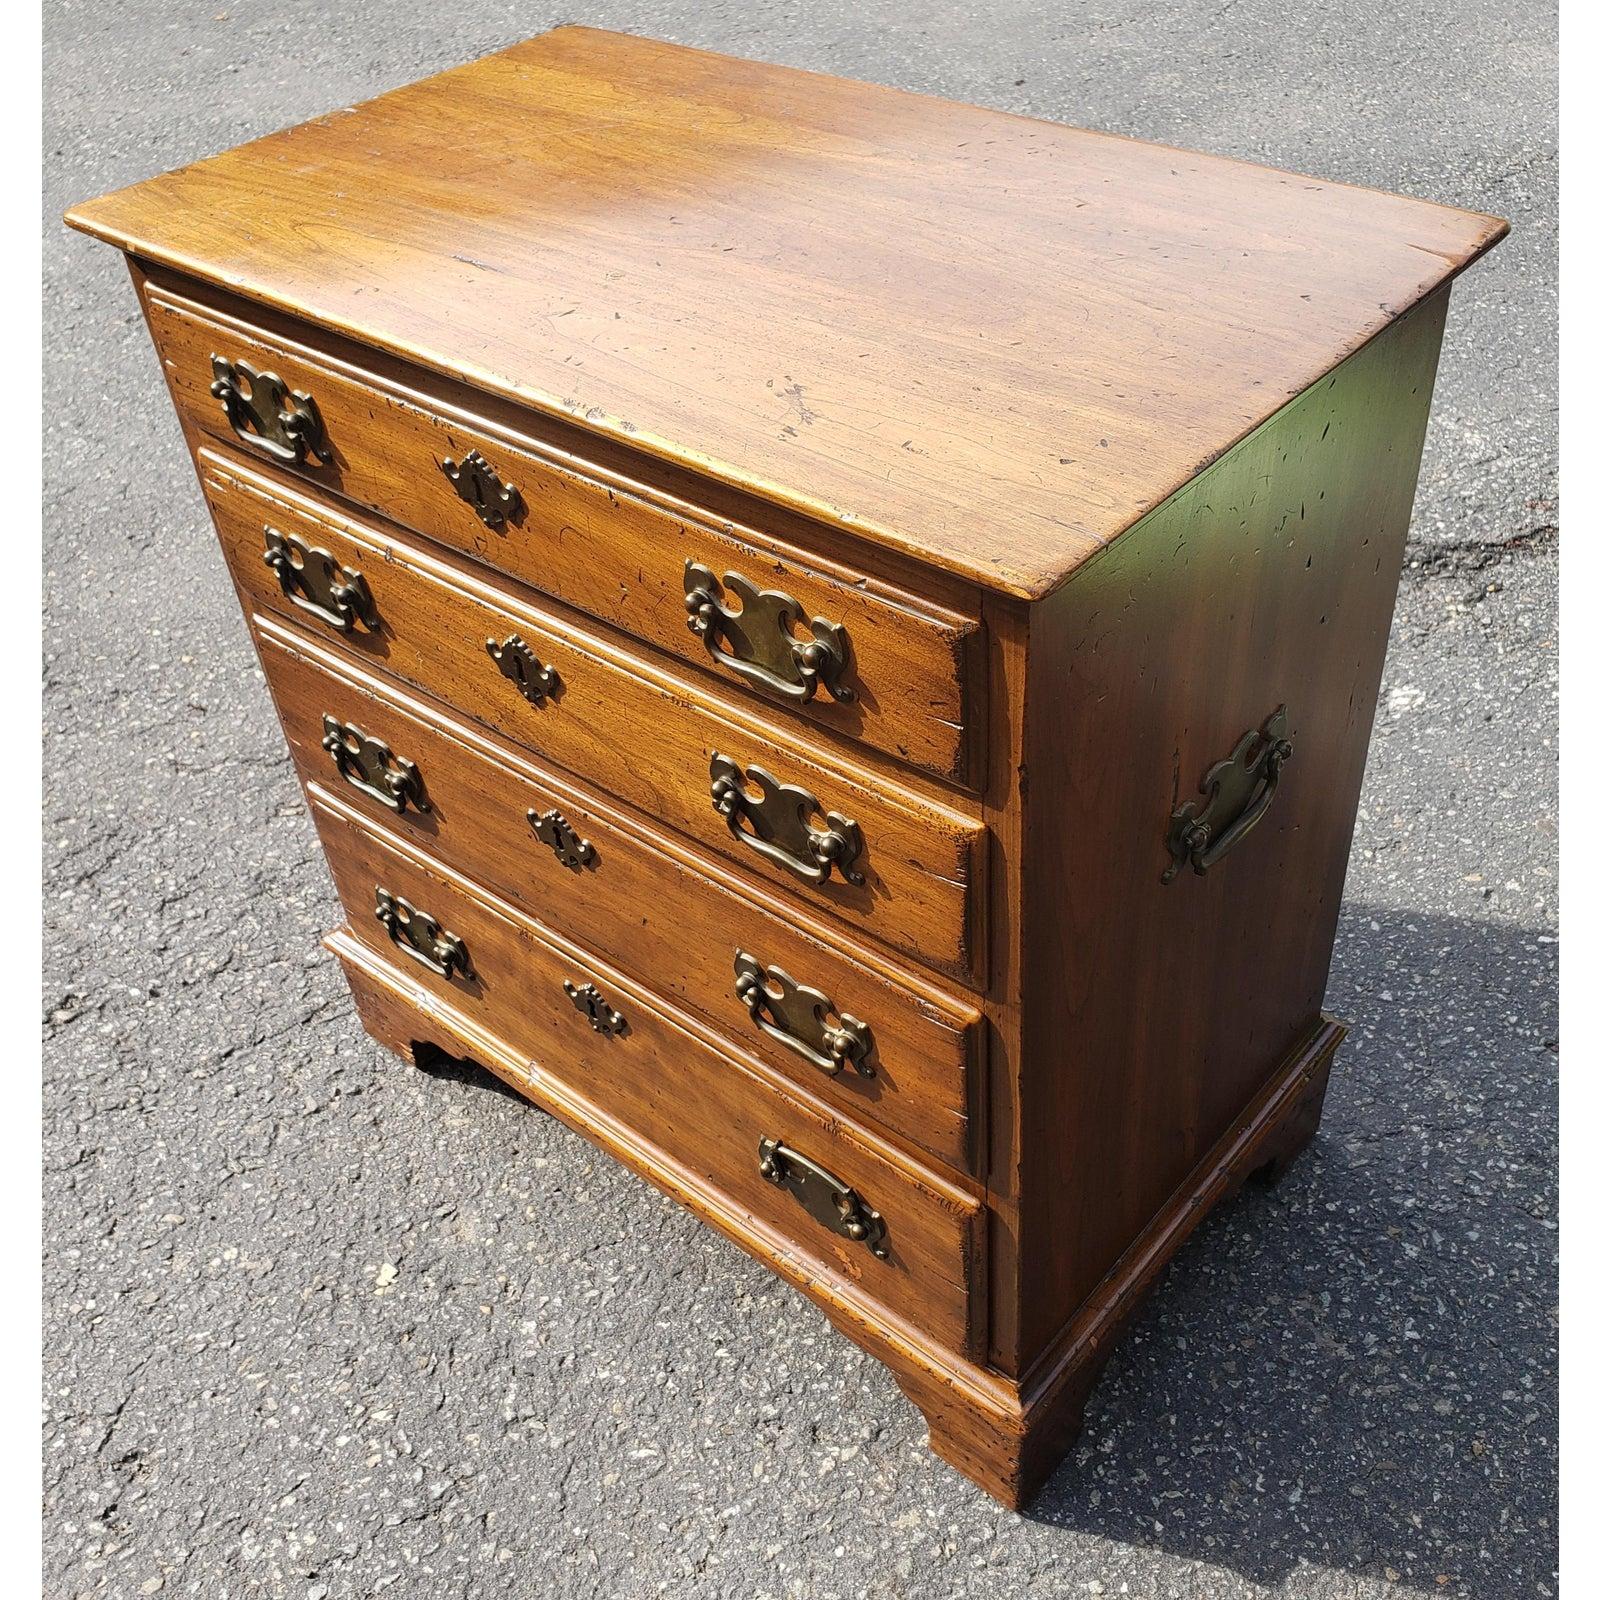 Vintage distressed Pennsylvania House chest of drawers. Few signs of age.
Measurements: 25 W x 14 D x 25 H.